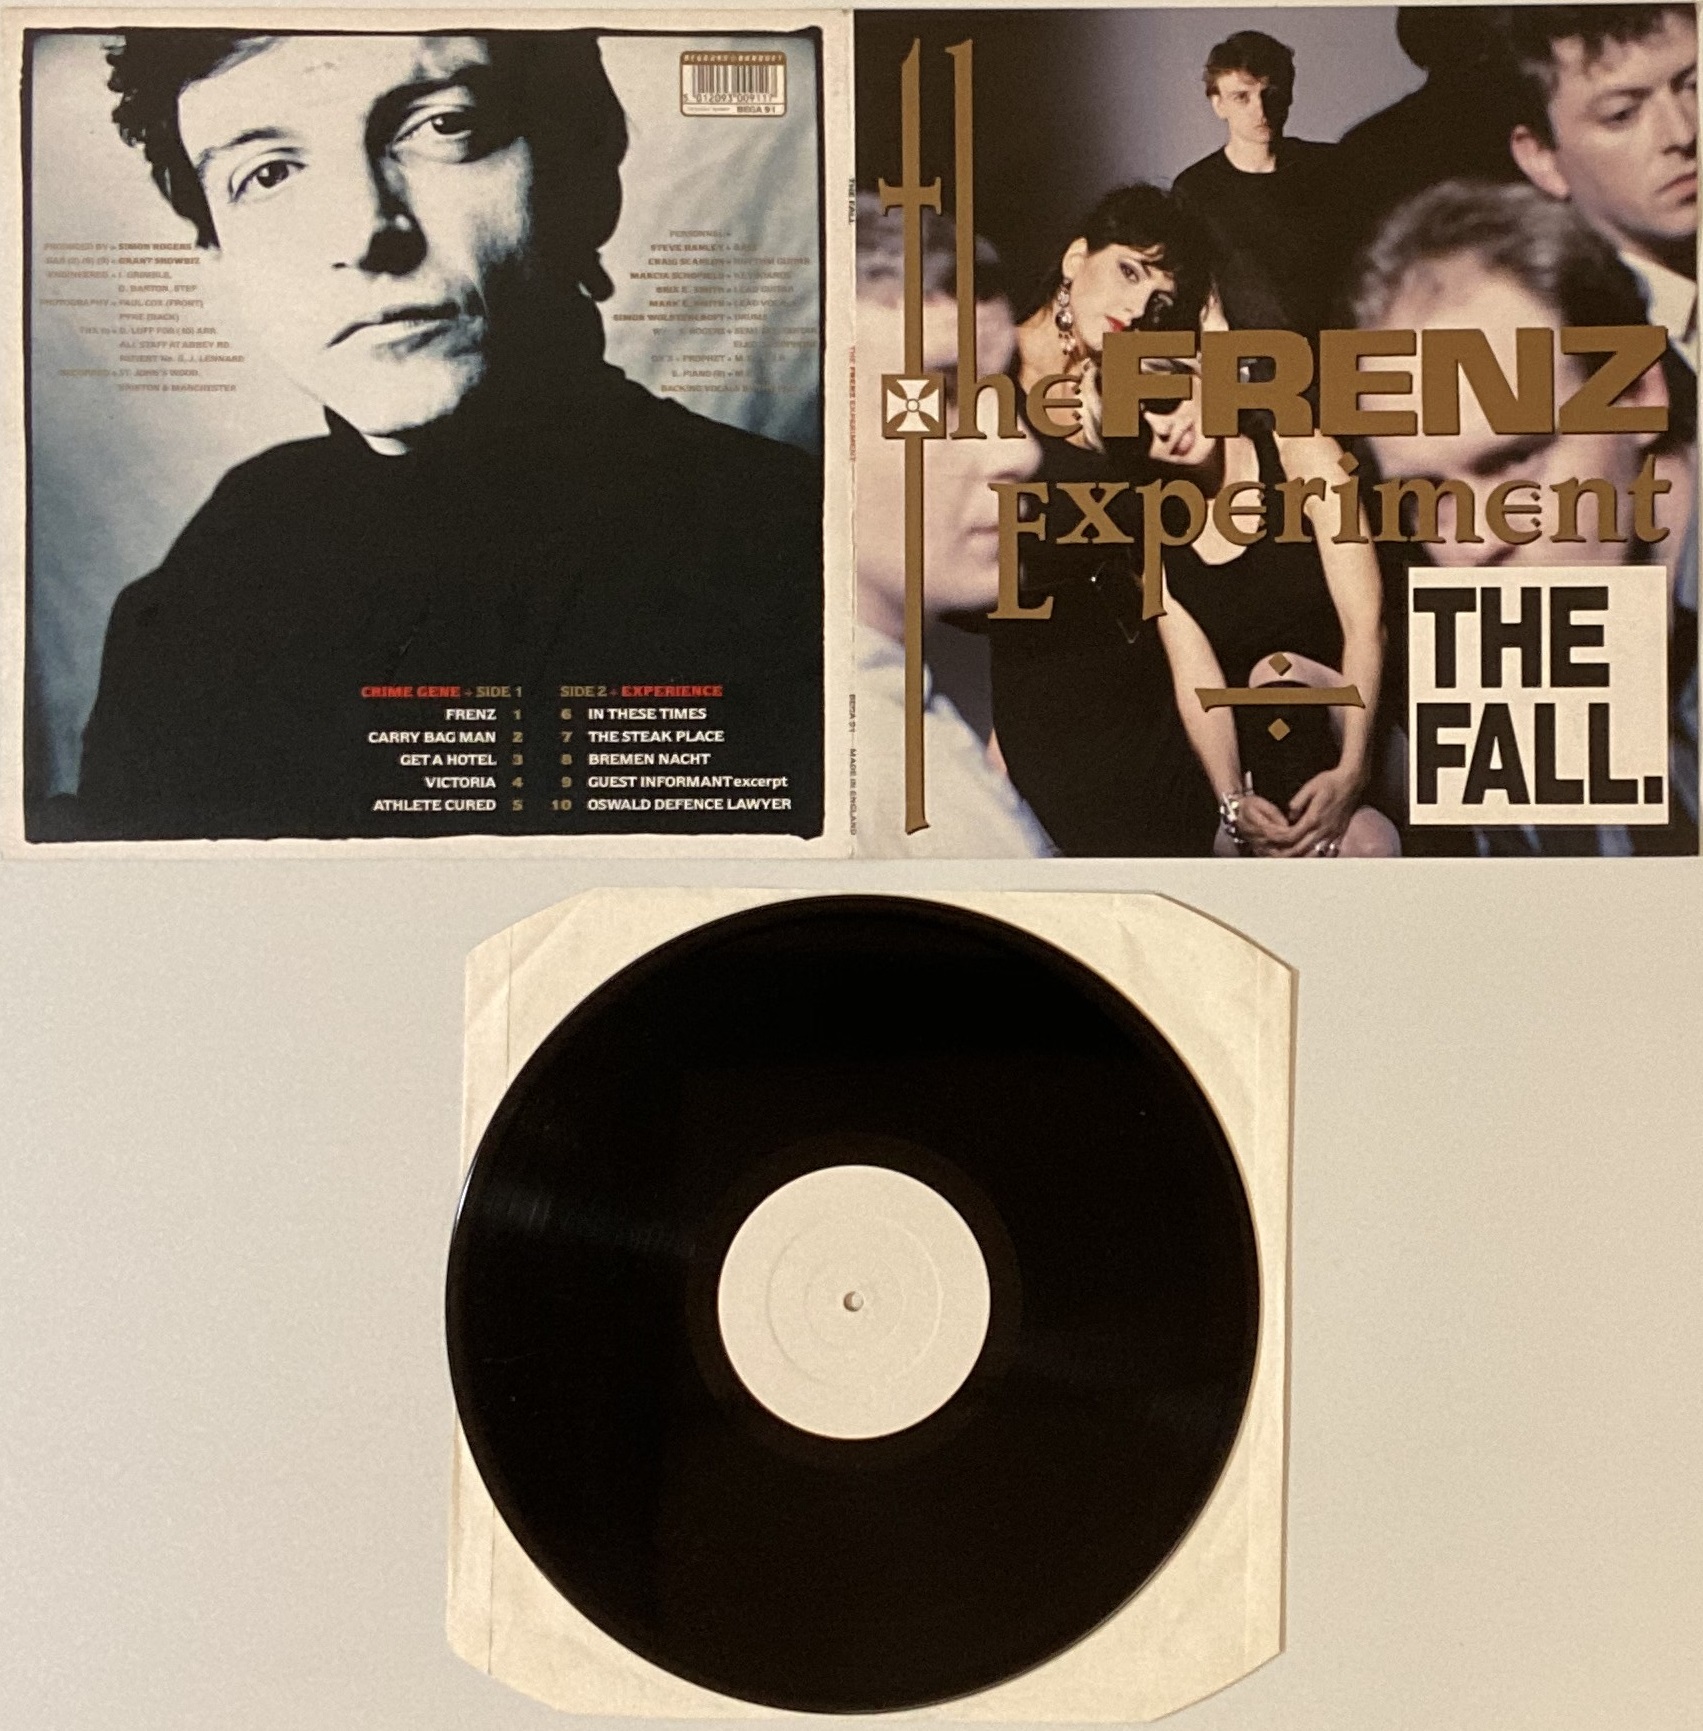 THE FALL - LP (TEST PRESSINGS) WITH CASSETTES AND CDs (MAINLY DEMO/PROMOS). - Image 4 of 9